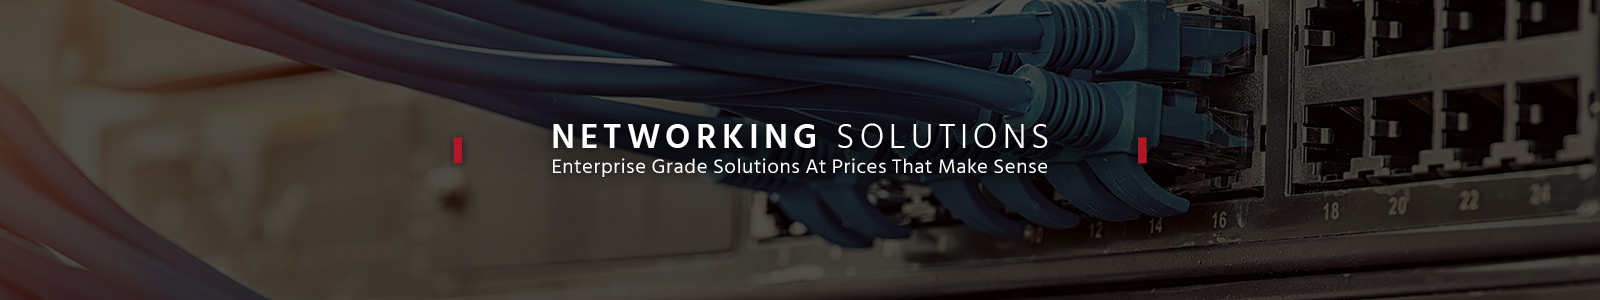 Networking Solutions
Enterprise Grade Solutions At Prices That Make Sense
Shop Now